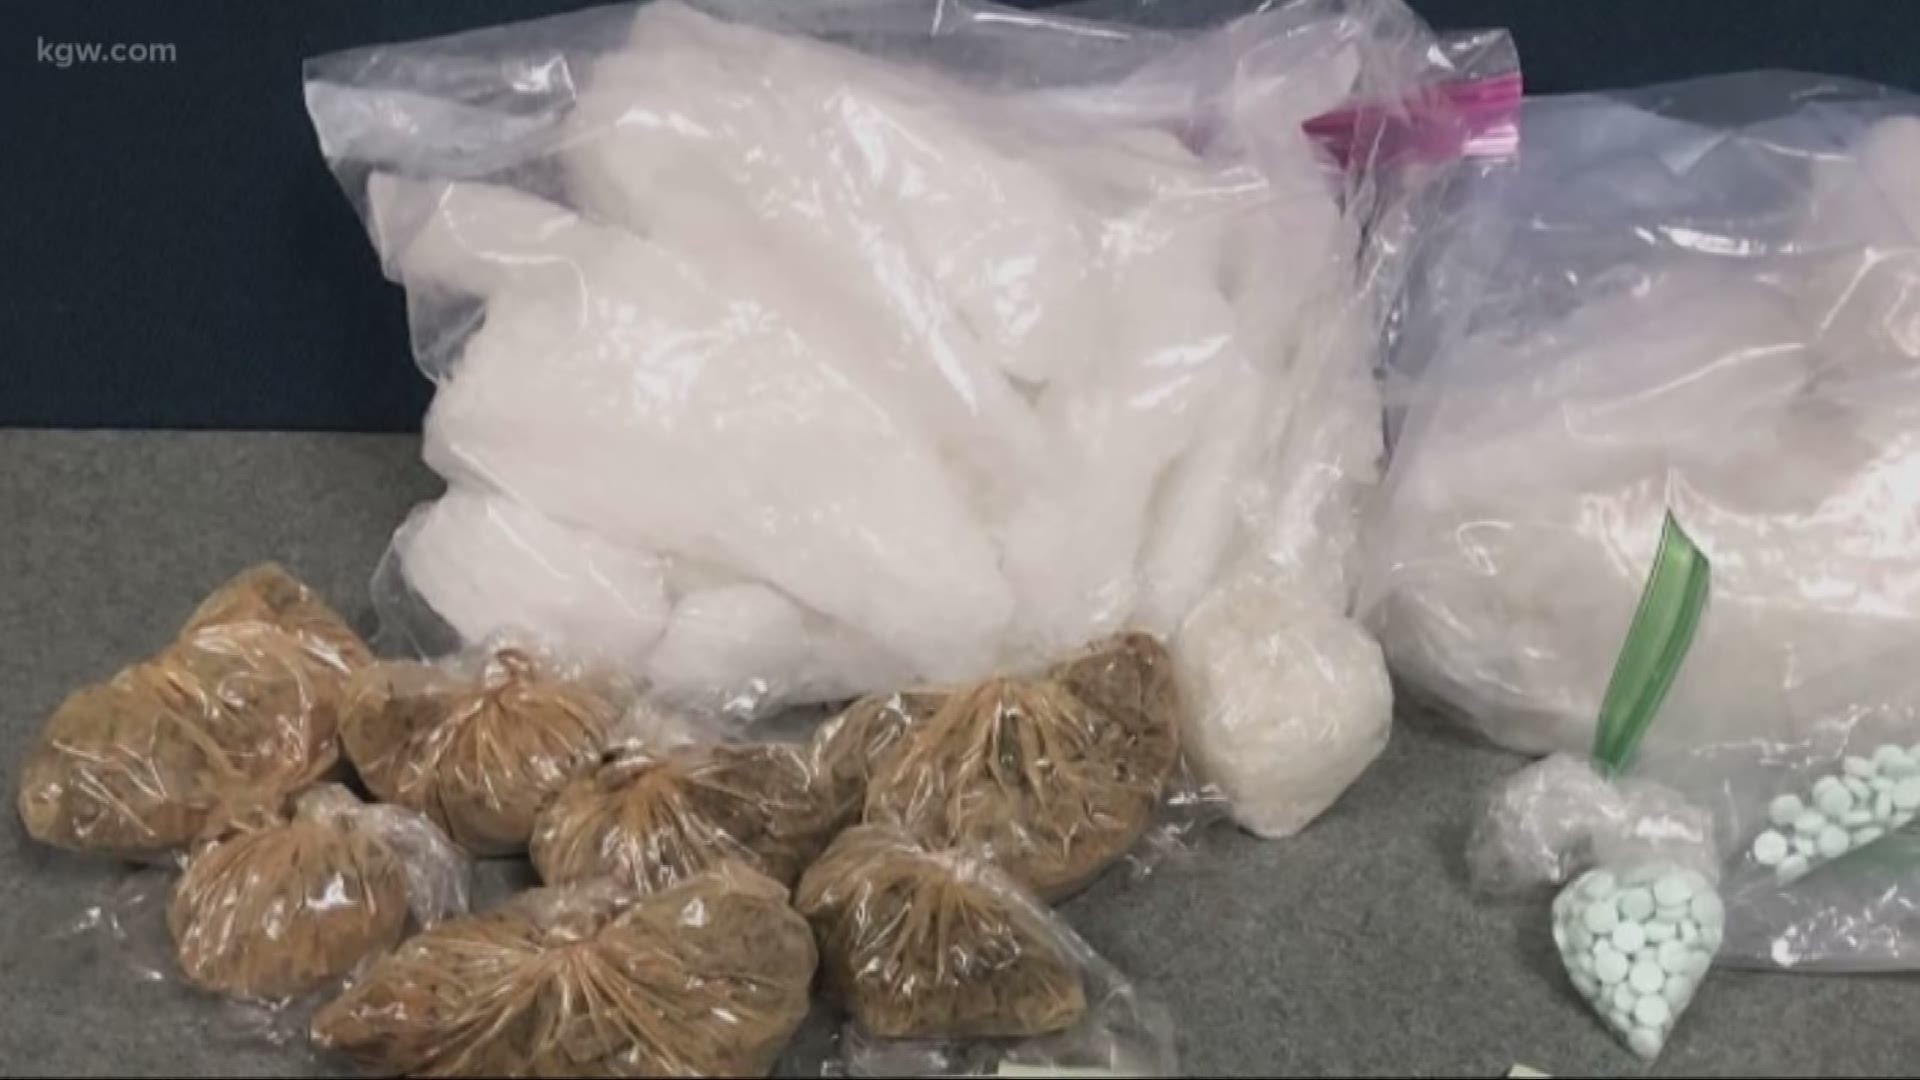 20 arrested in one of the largest drug busts in Oregon history

Feds bust Mexico-to-Oregon drug ring; 20 arrested